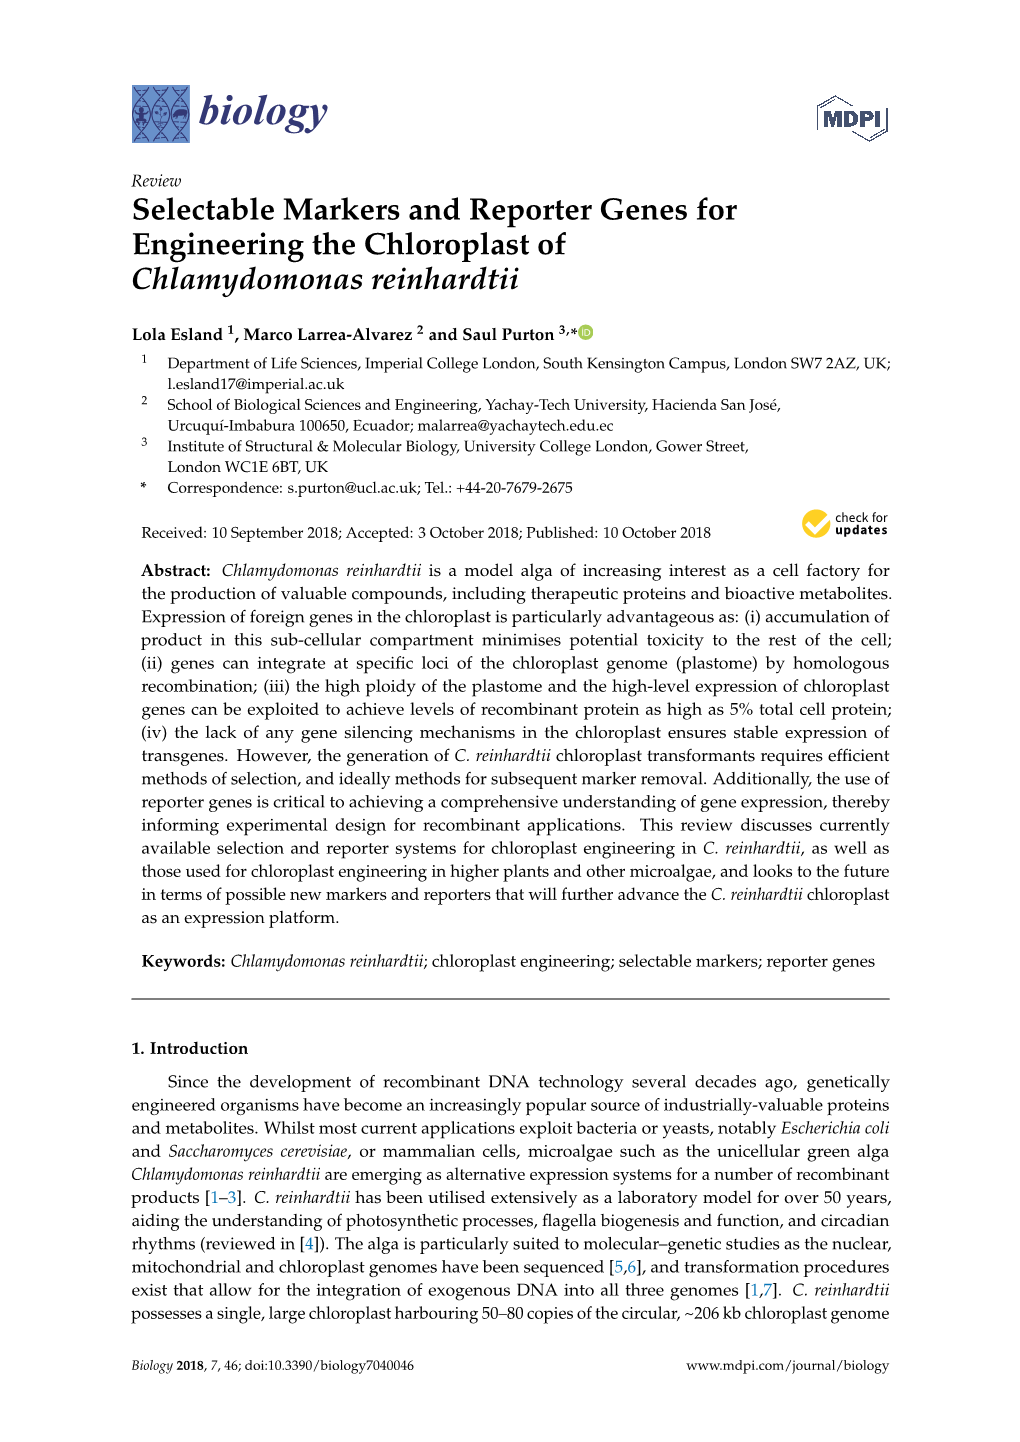 Selectable Markers and Reporter Genes for Engineering the Chloroplast of Chlamydomonas Reinhardtii